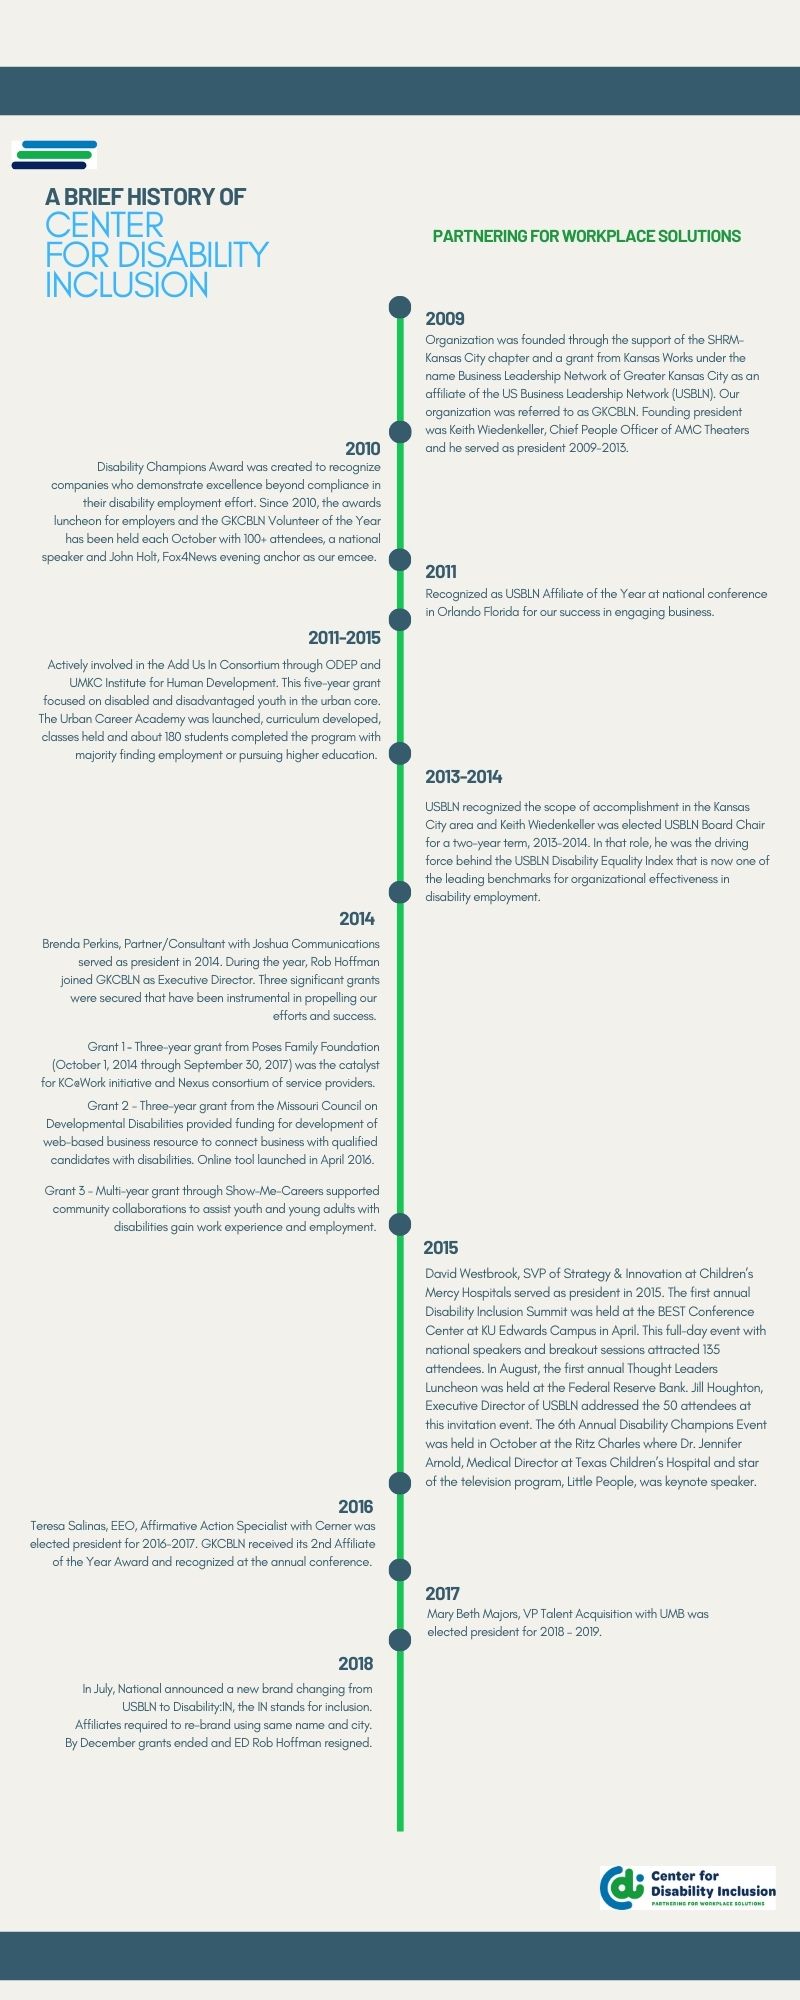 History of Center for Disability Inclusion from 2009 thru 2018